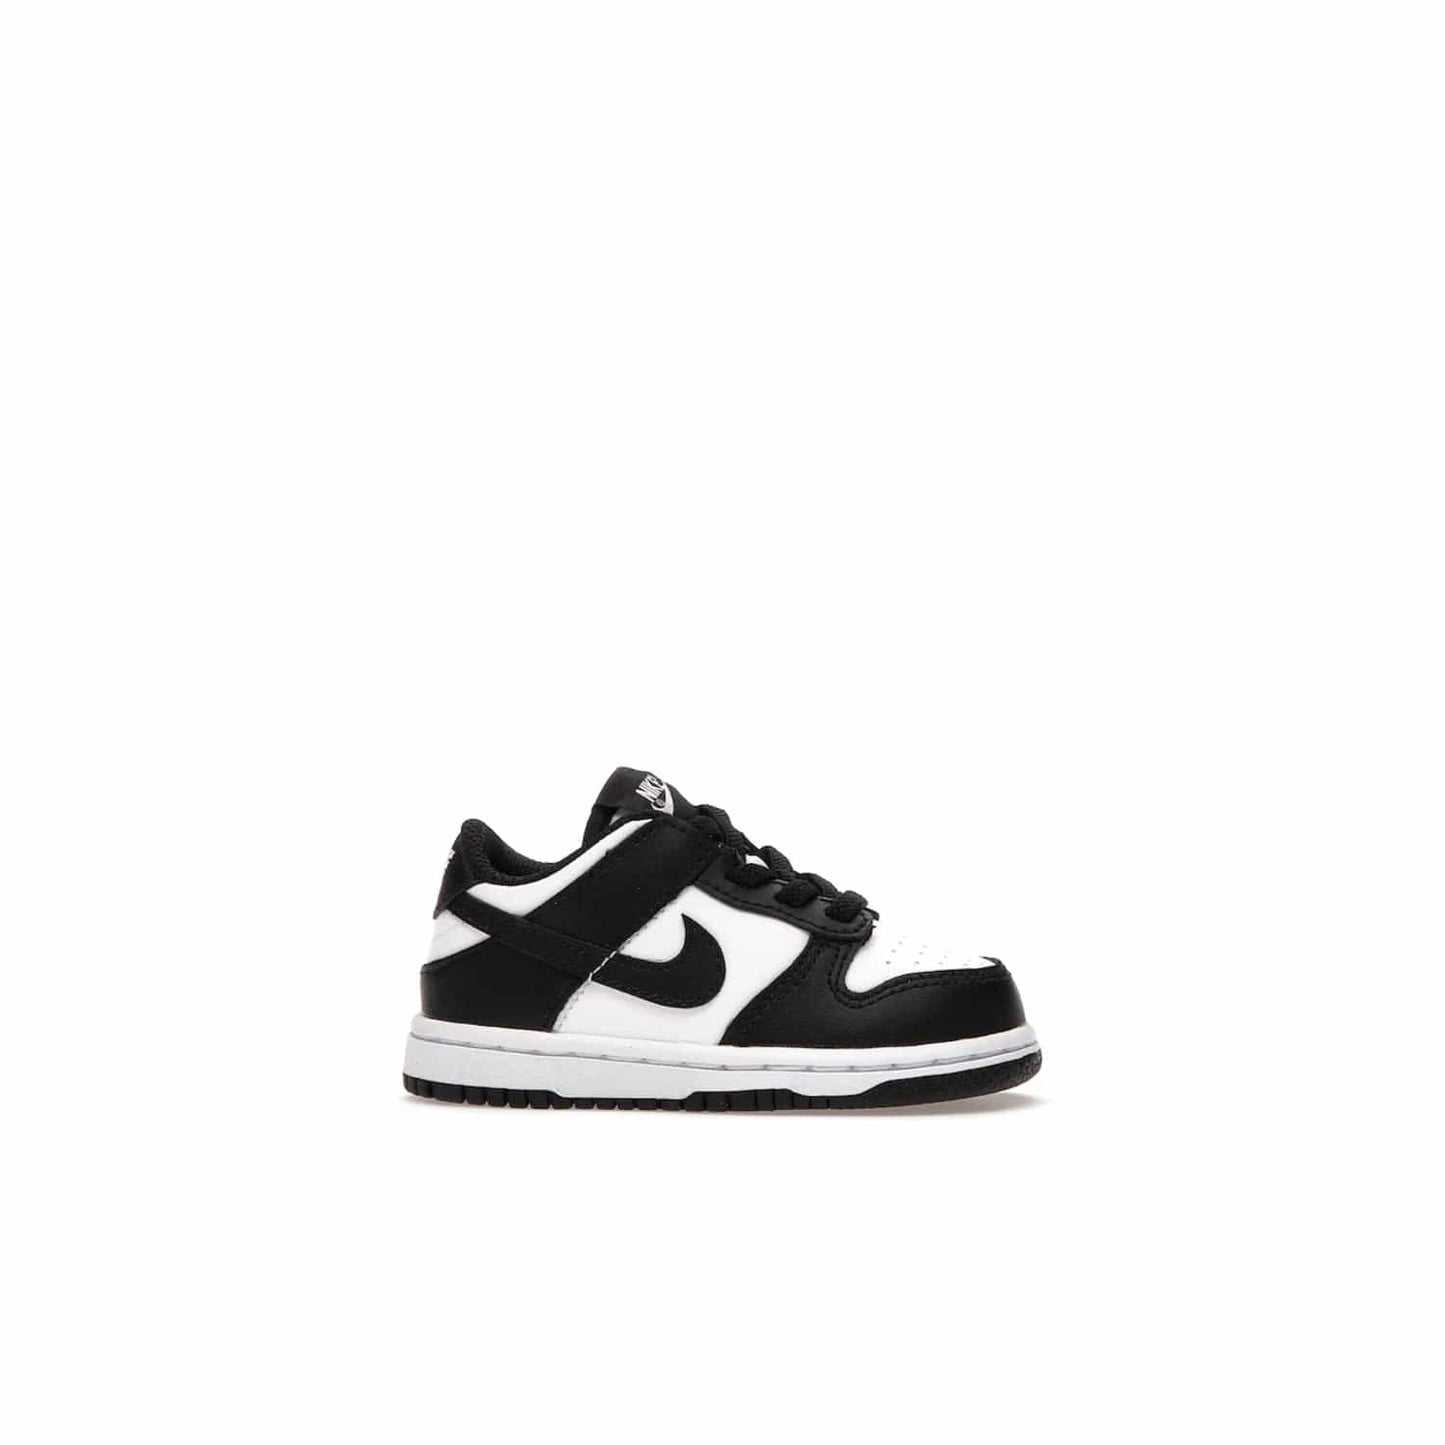 Nike Dunk Low Retro White Black Panda (2021) (TD) - Image 2 - Only at www.BallersClubKickz.com - The perfect blend of classic style and modern style, the Nike Dunk Low Retro White Black (TD) toddler shoe has a soft leather upper, white midsole, and black outsole. Signature Swoosh branding and lightly padded tongue give it timeless Nike style. Released in March 2021.